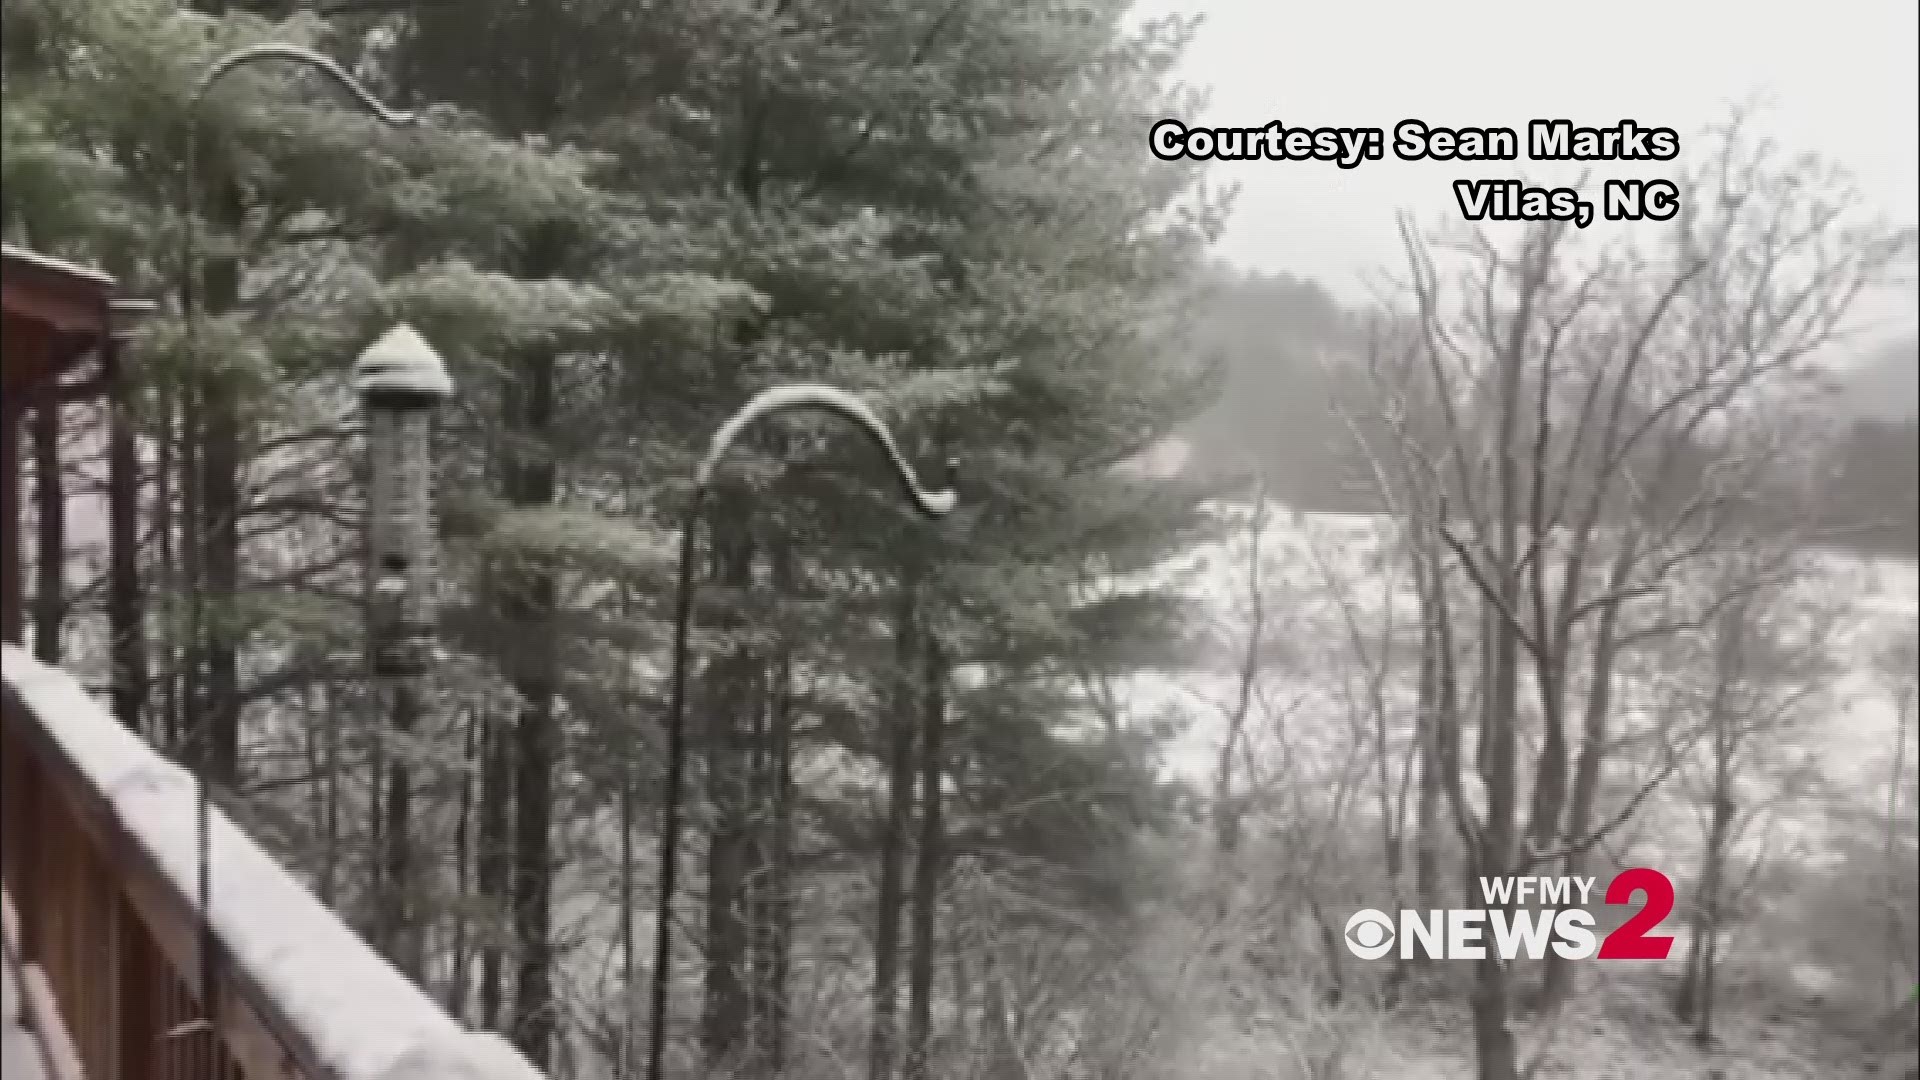 SNOW-O-M-G! It's looking like a winter wonderland around Boone! This video was taken in Vilas, NC.